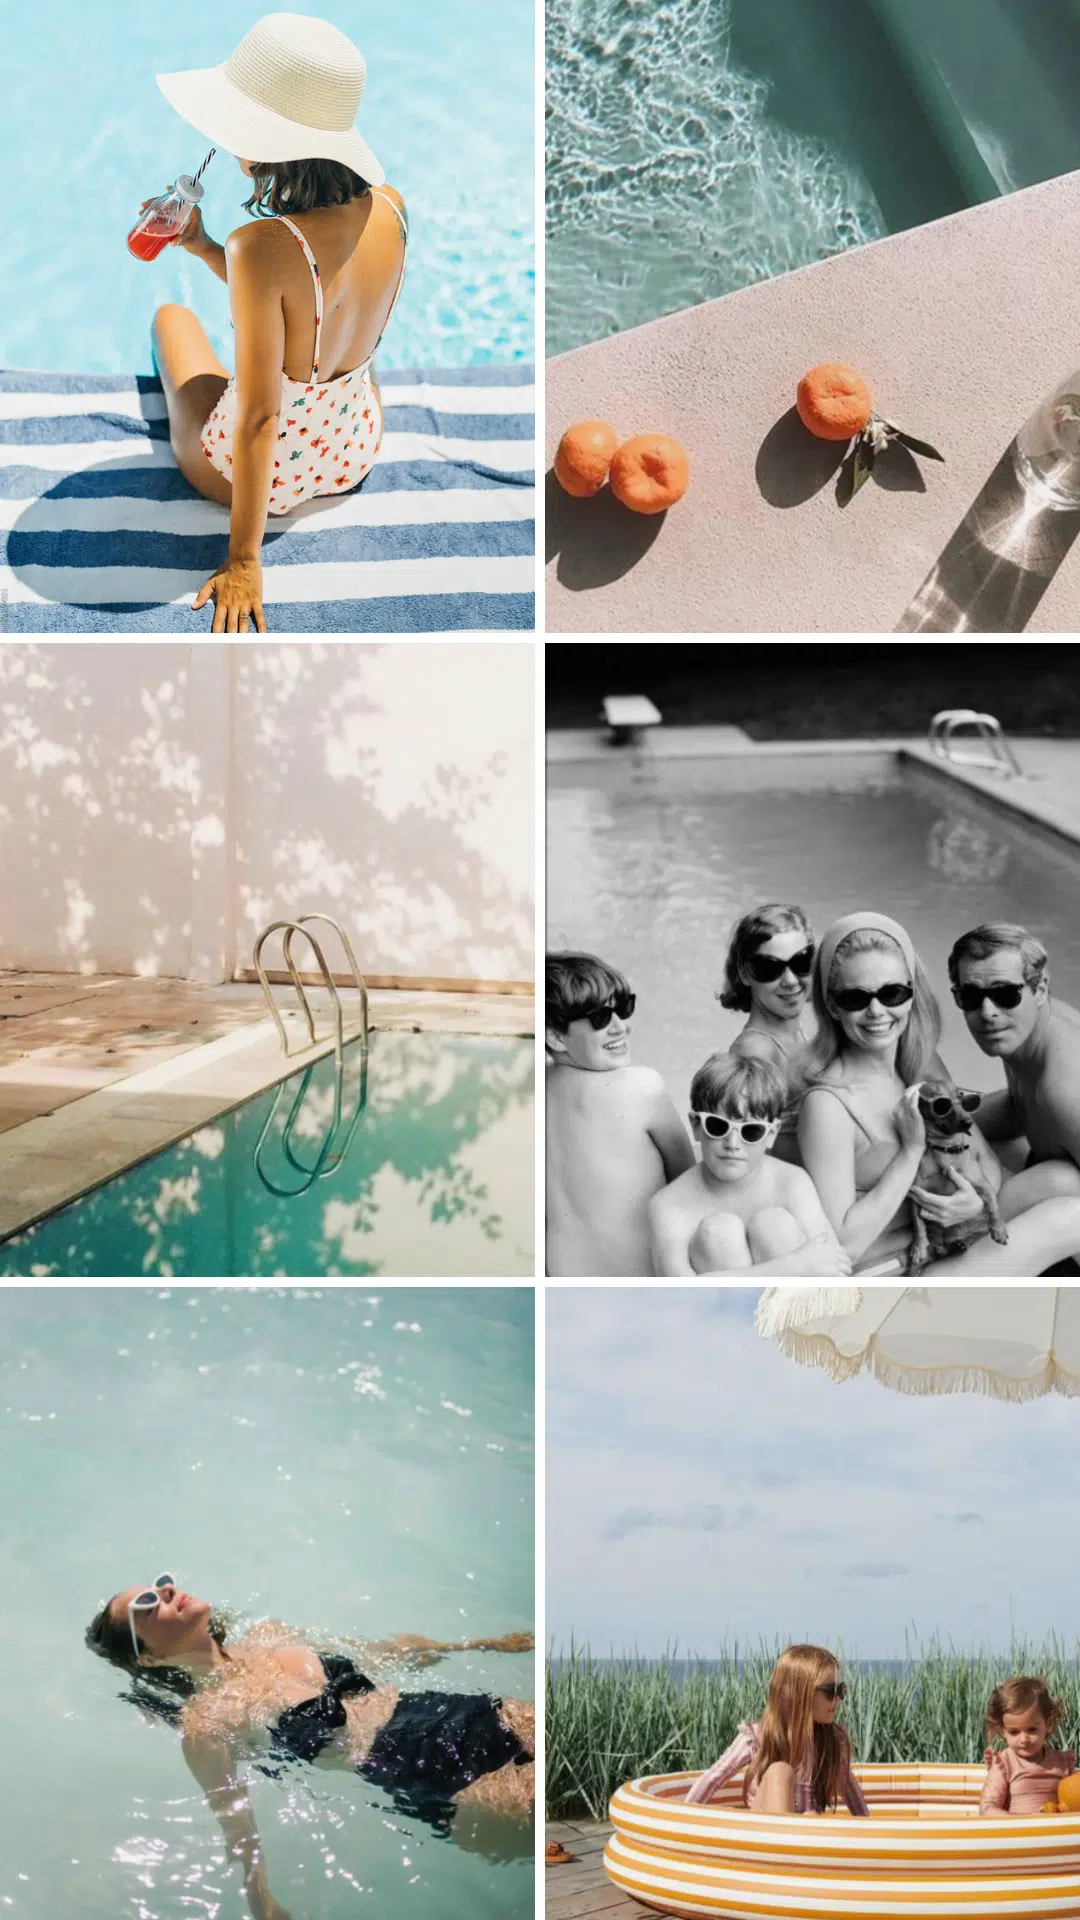 The Perfect Oasis: Why Having a Family Pool Shoot at Home is a Great Idea